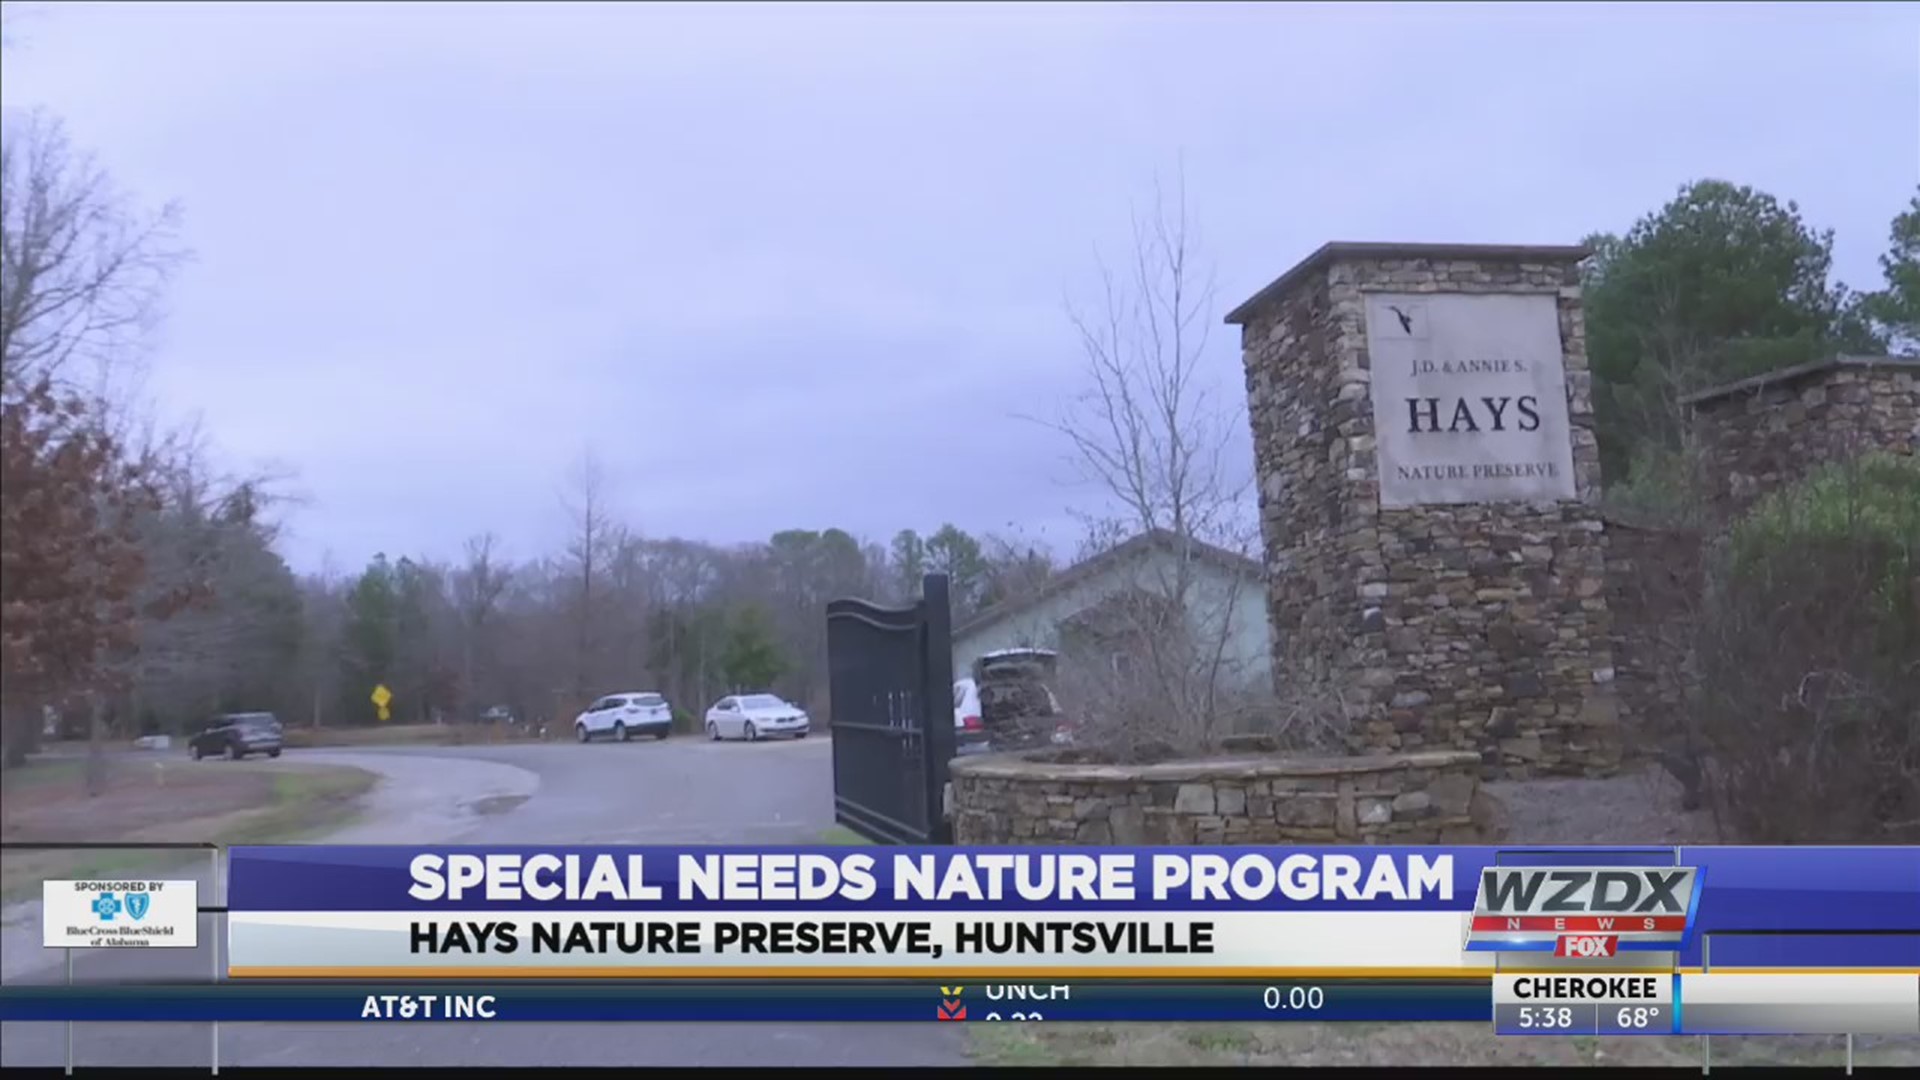 Hays Nature Preserve in Huntsville is spreading the word about their programs for those with special needs in the Valley.